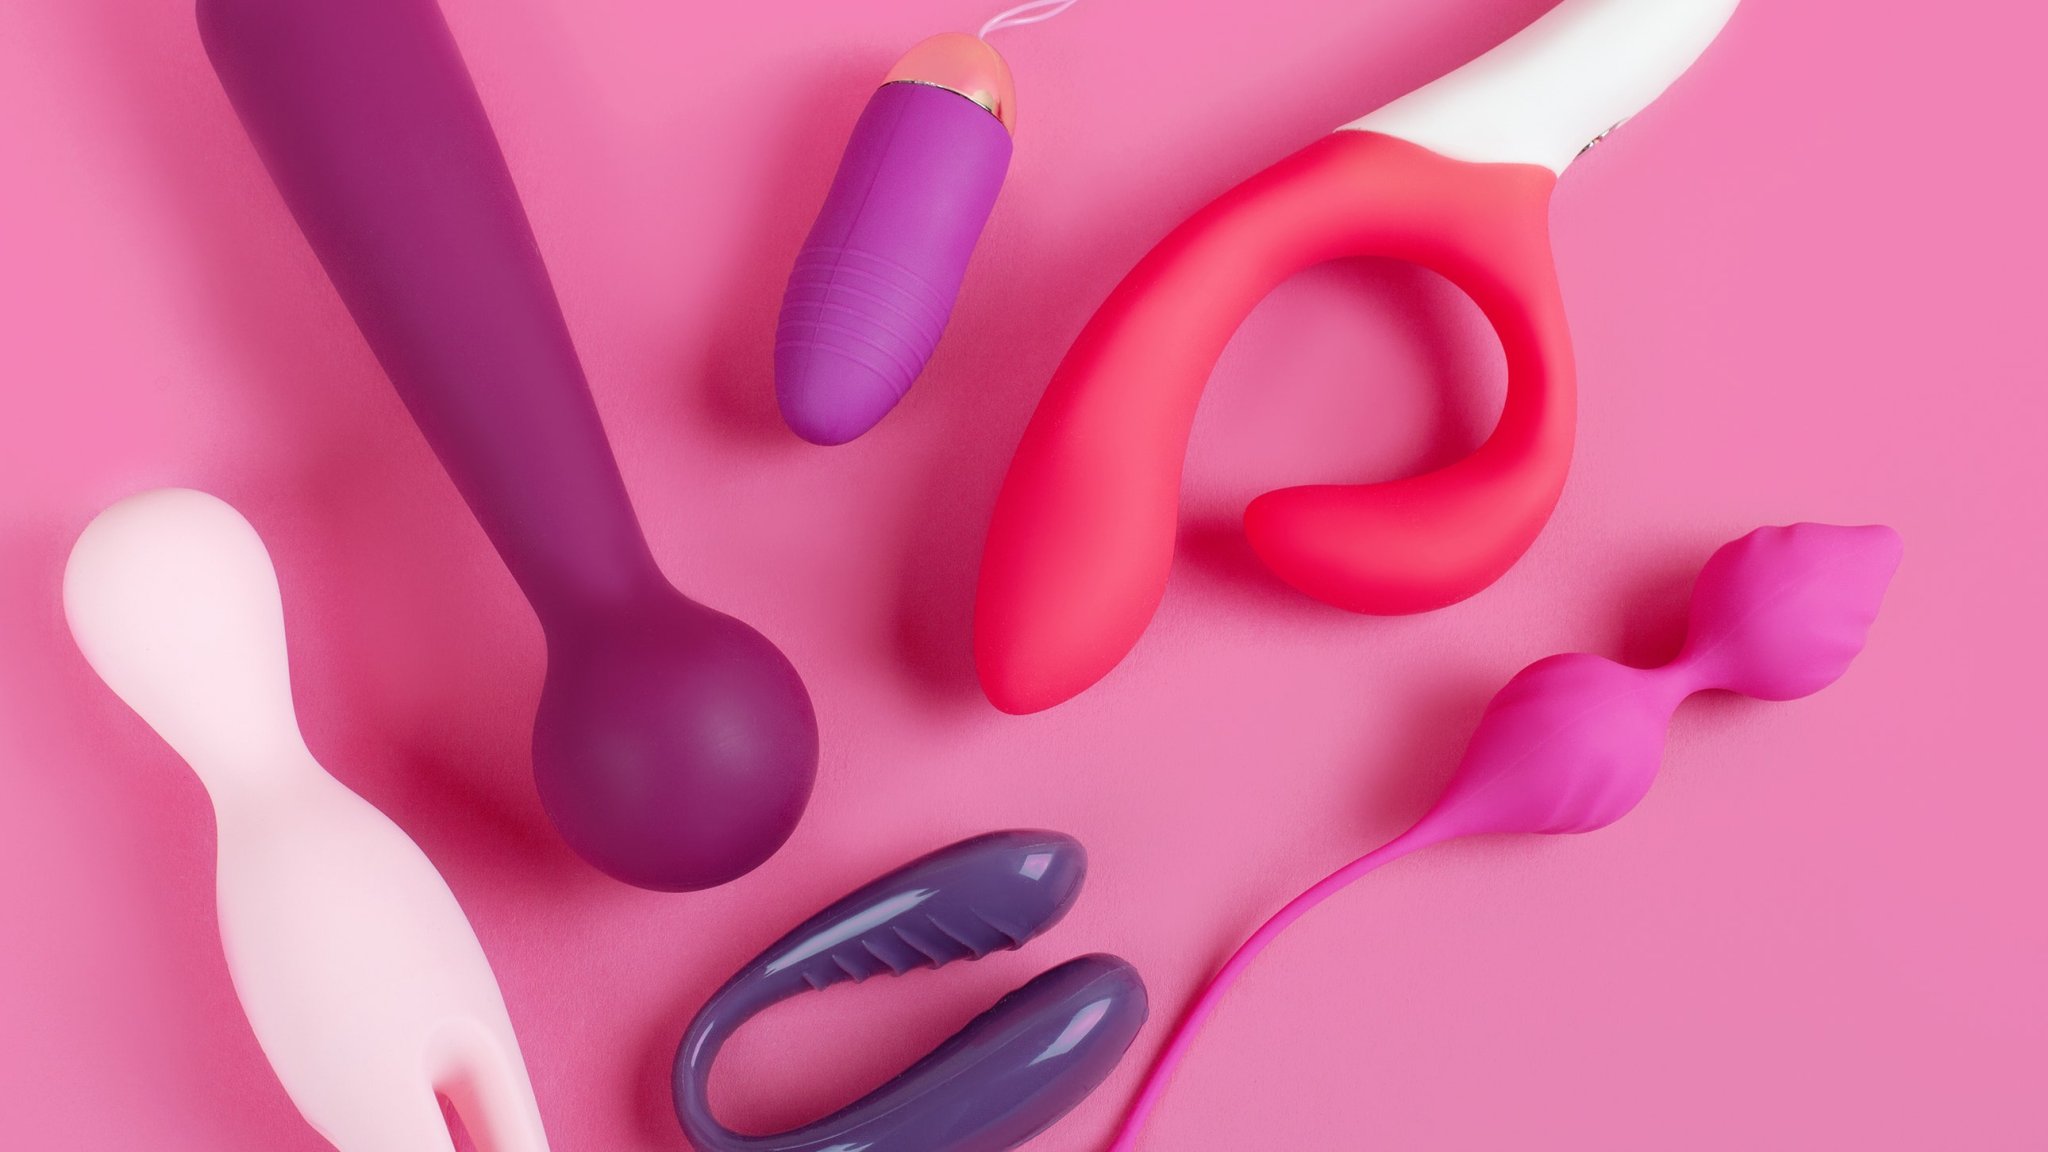 30 best vibrators to buy now, according to the women who have tried them